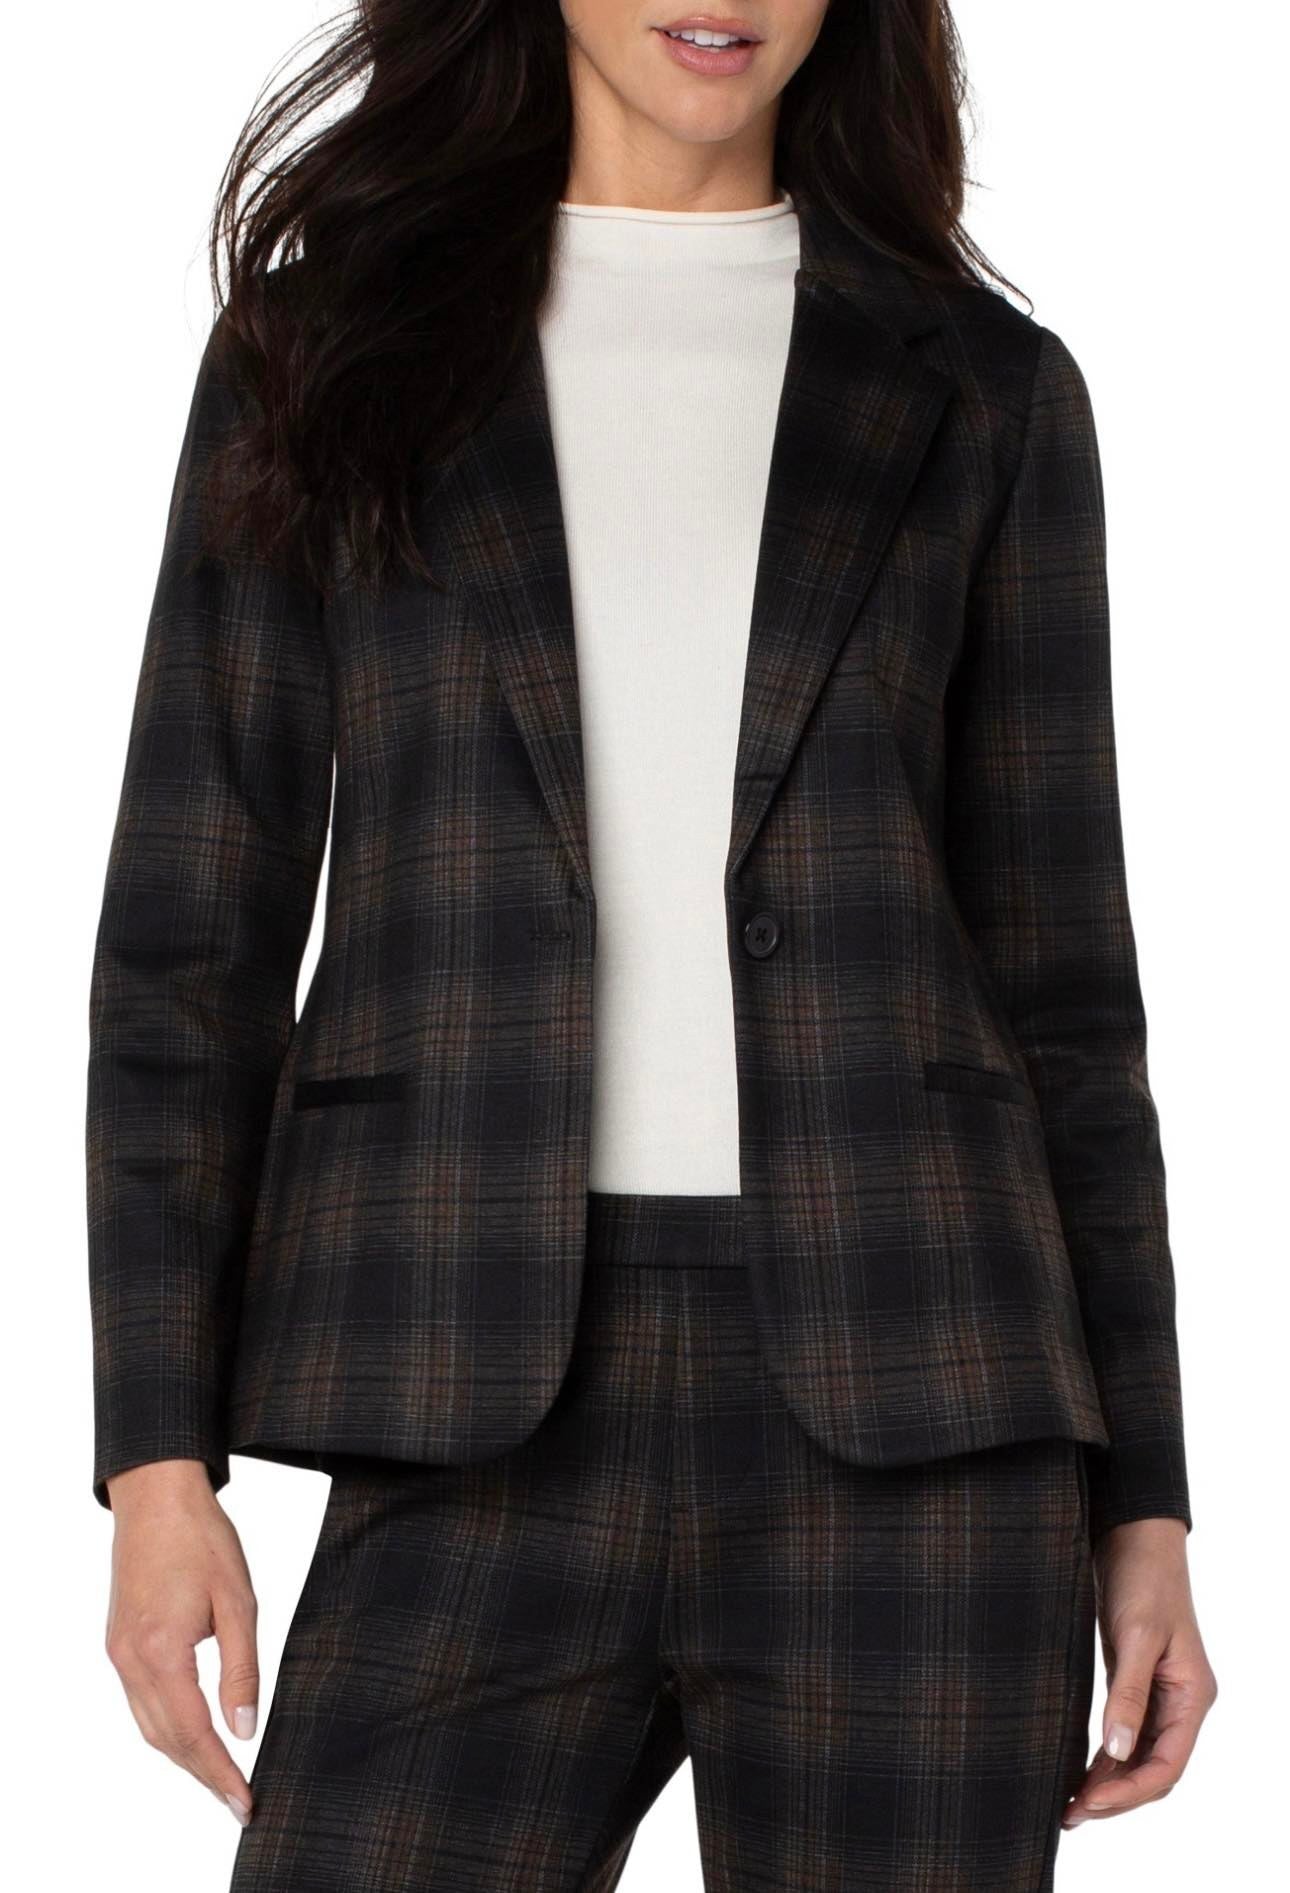 Liverpool Brown Black Plaid Fitted Blazer - Clearance Final Sale